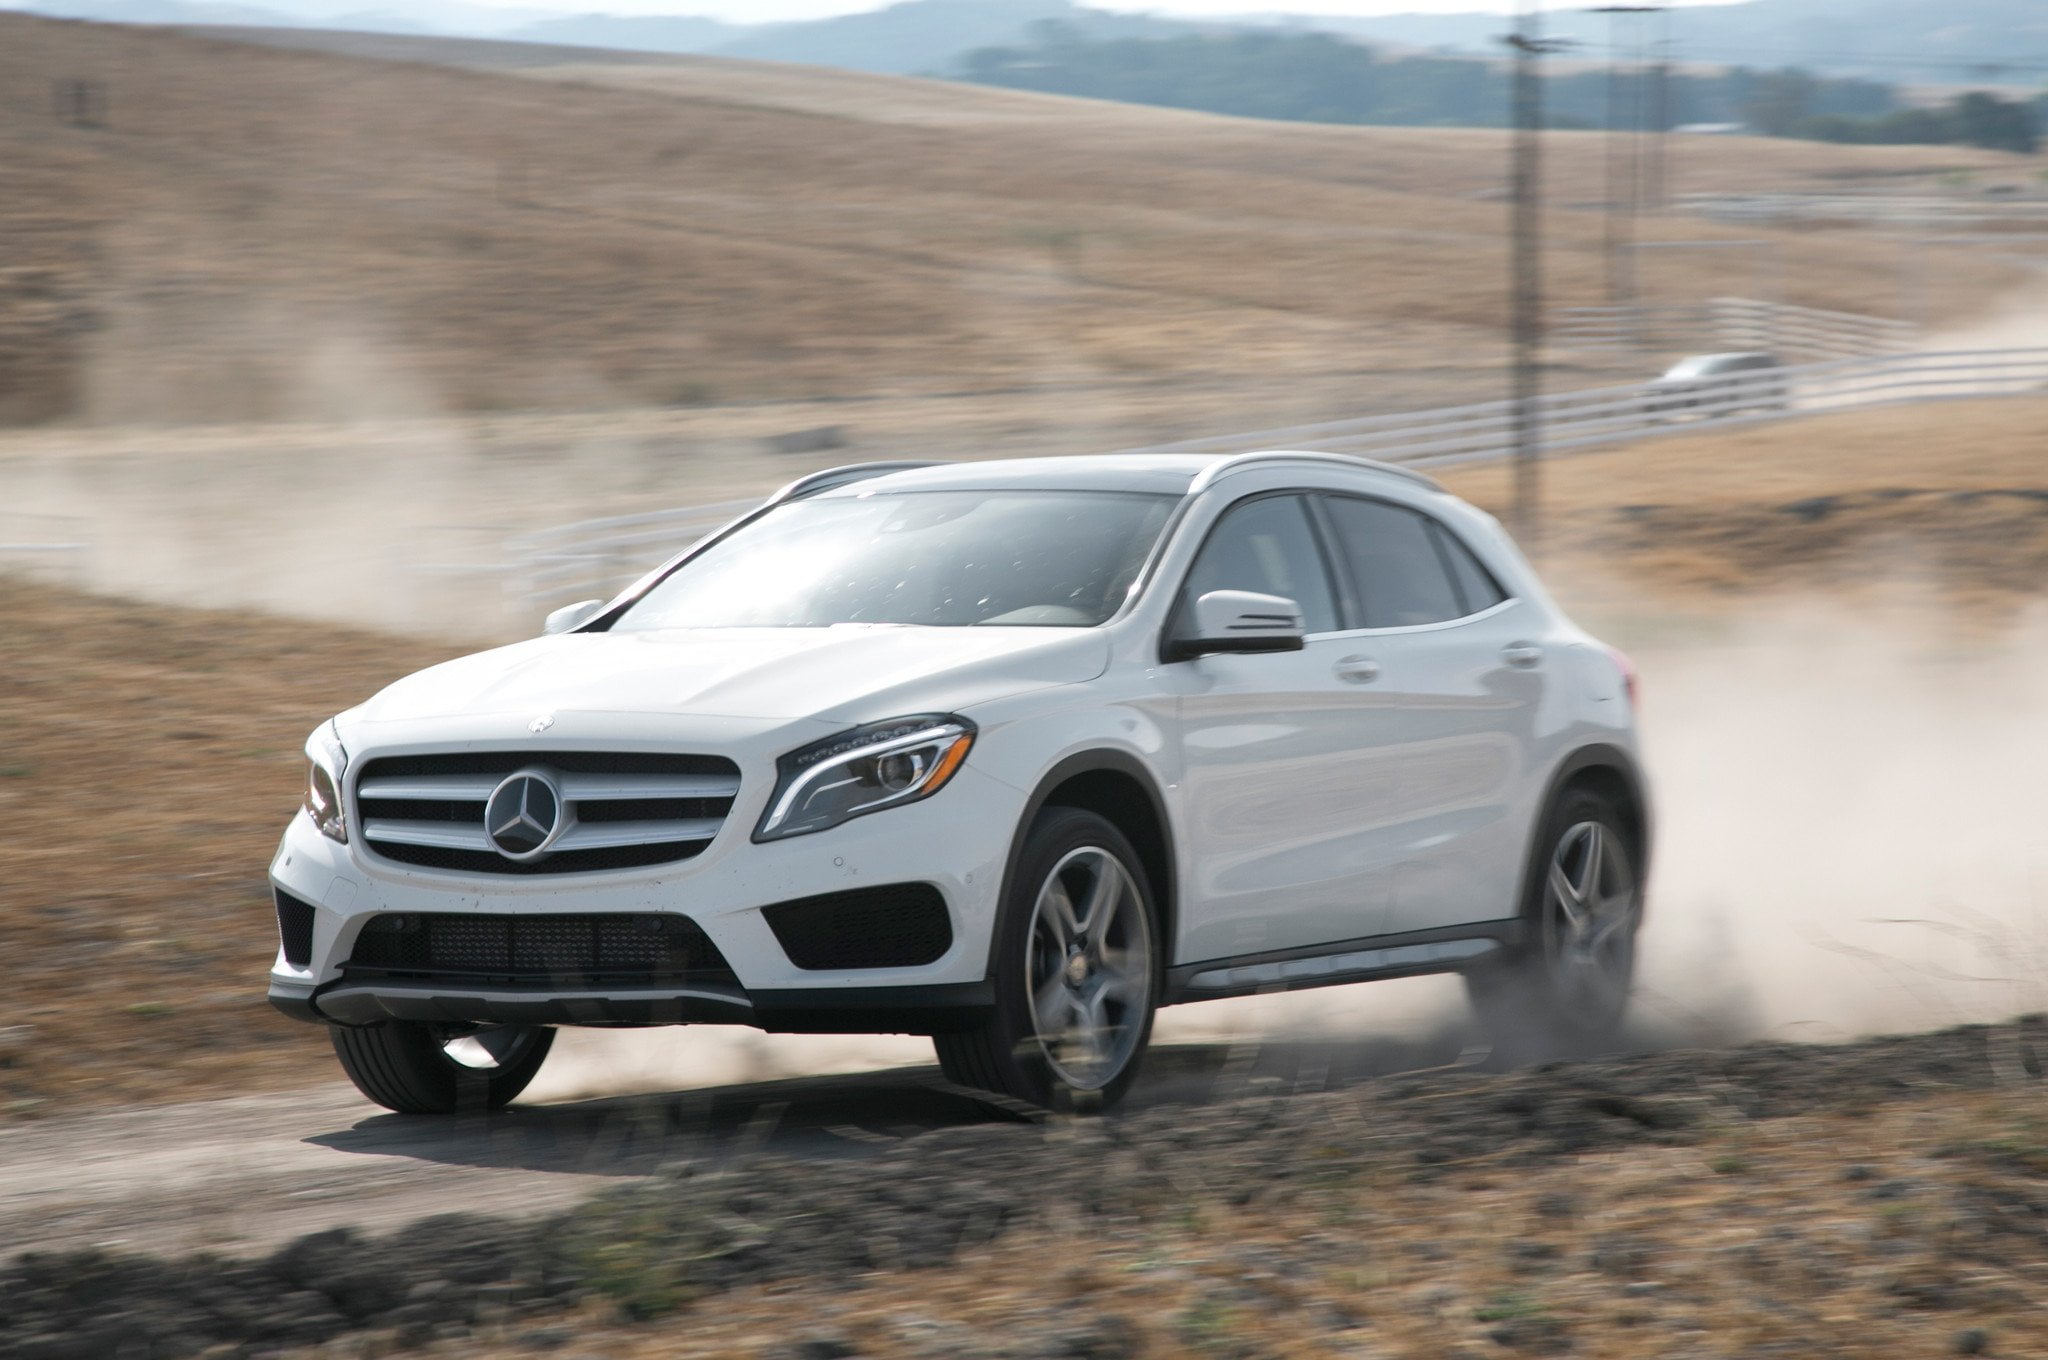 2015 Mercedes Benz GLA250 4Matic front three quarters in motion